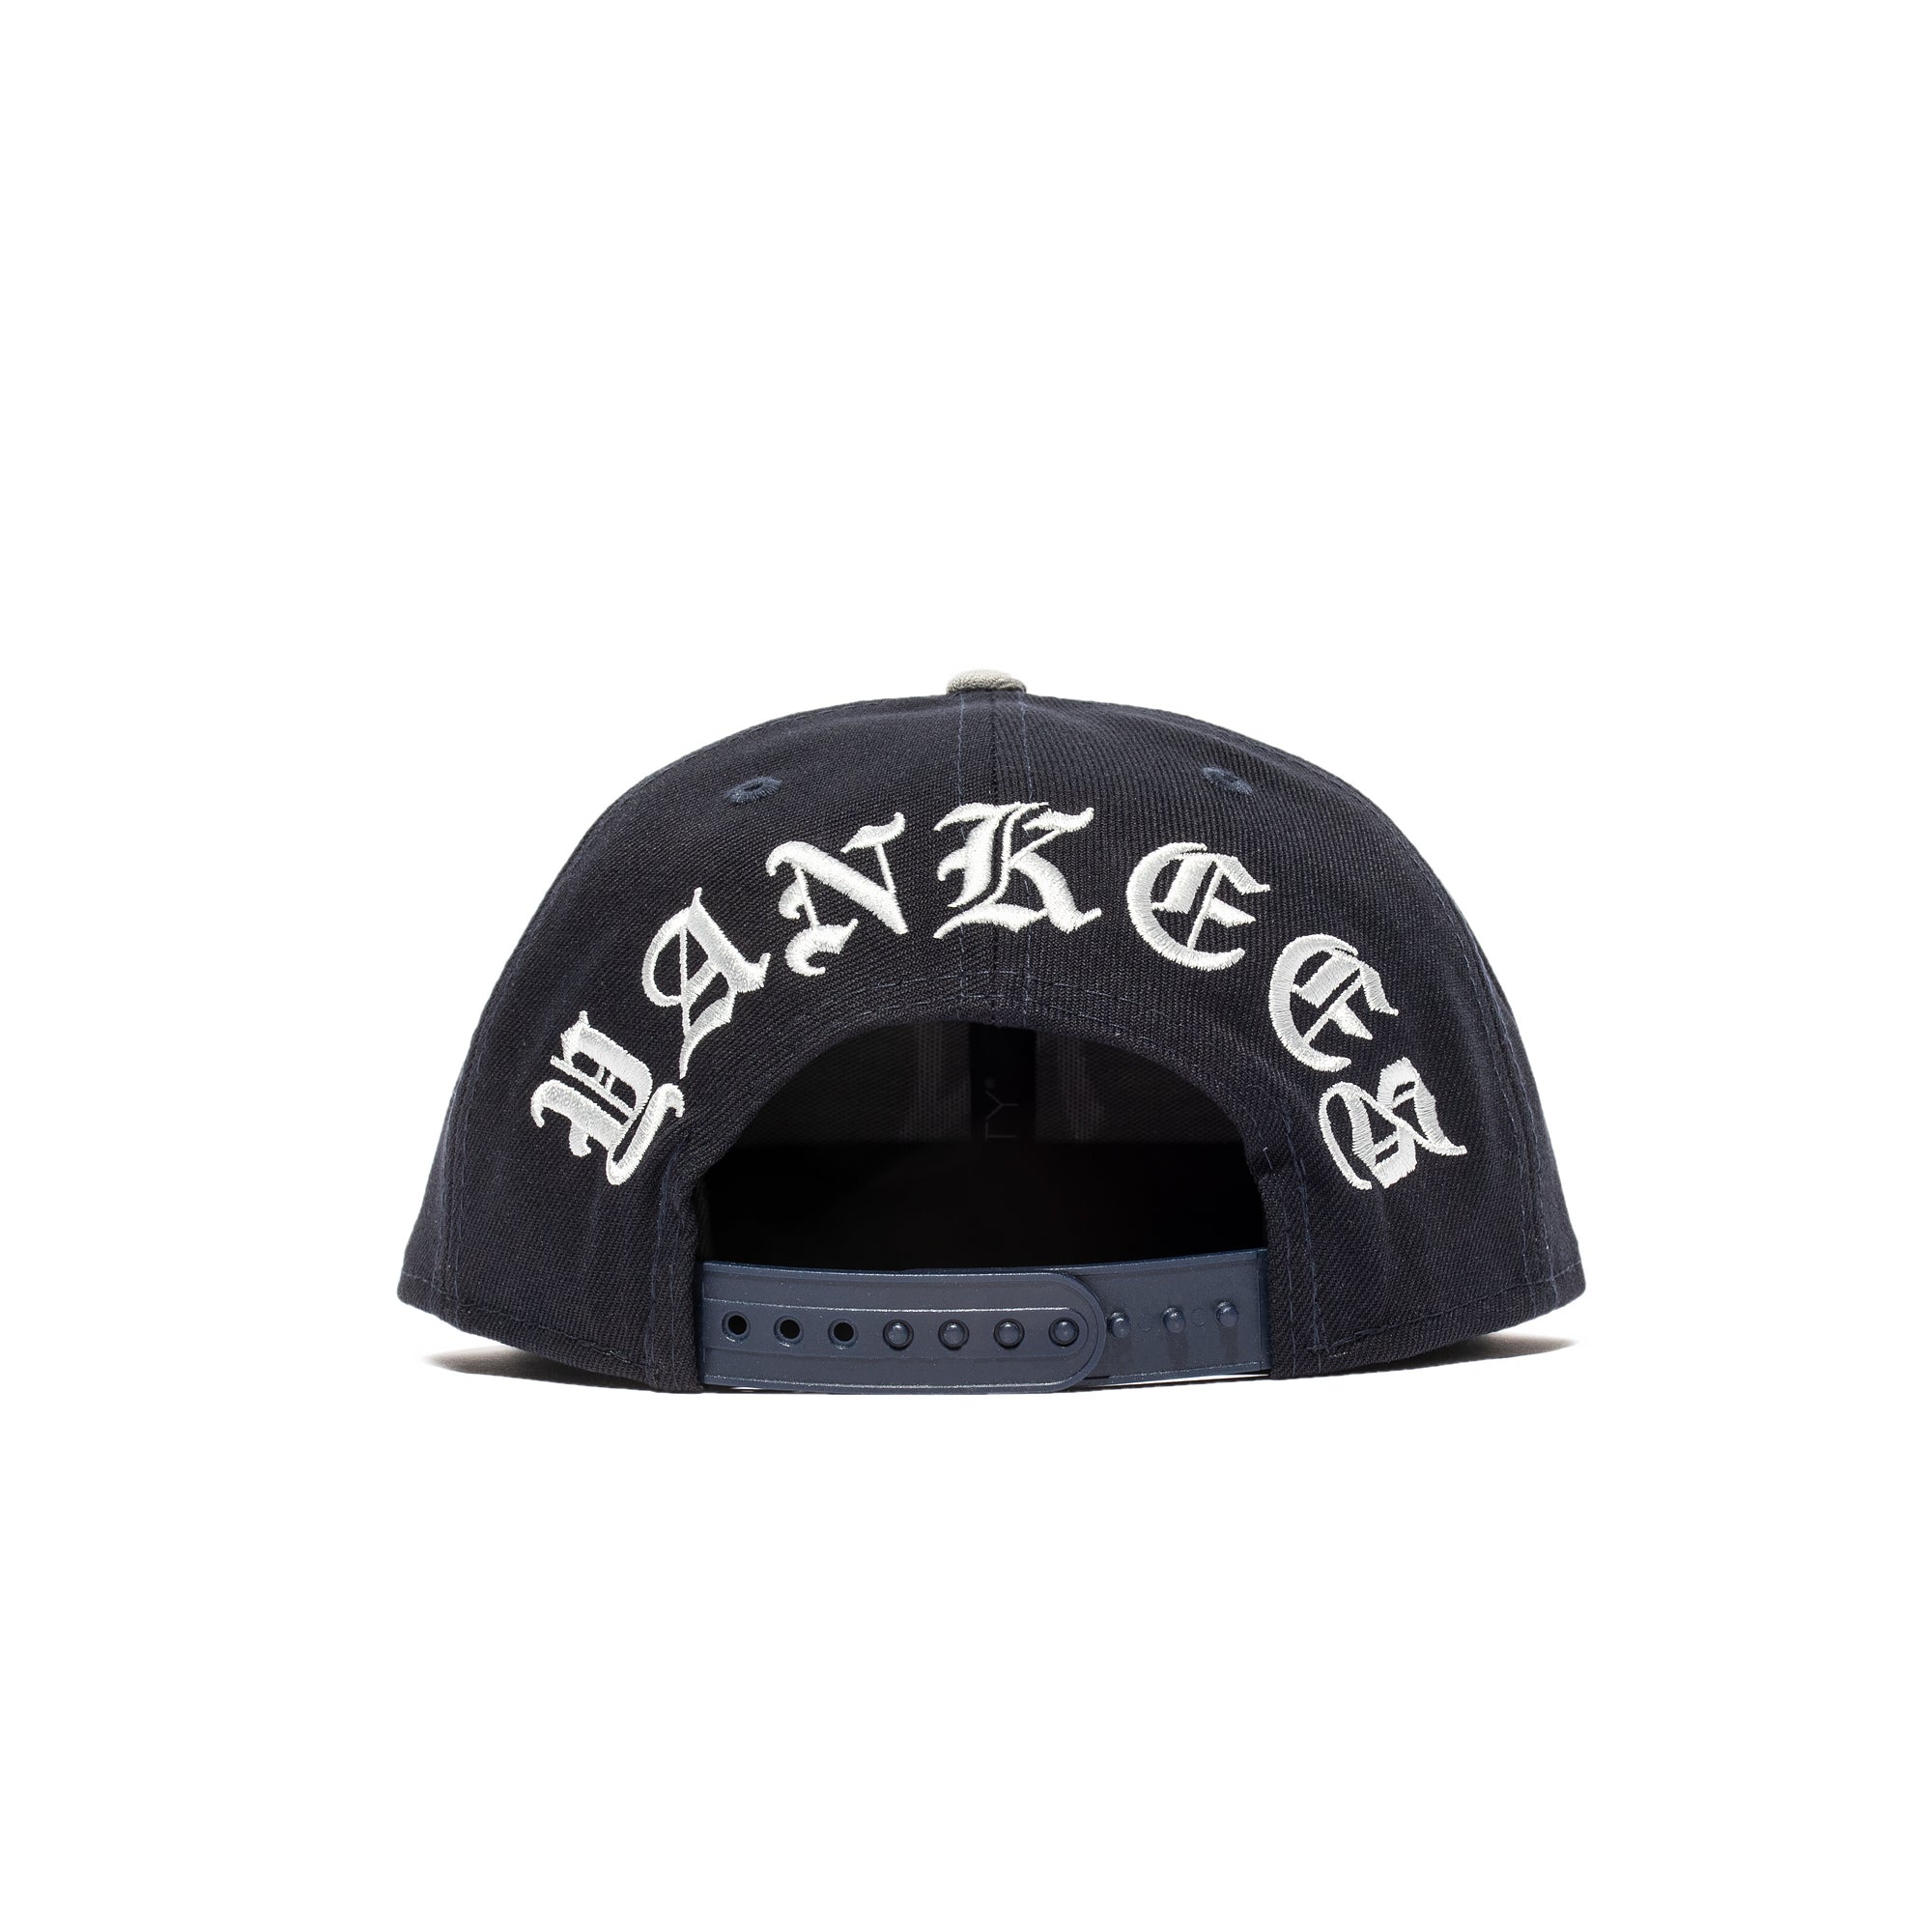 New Era Backletter Arch 9FIFTY New York Yankees Snapback Hat